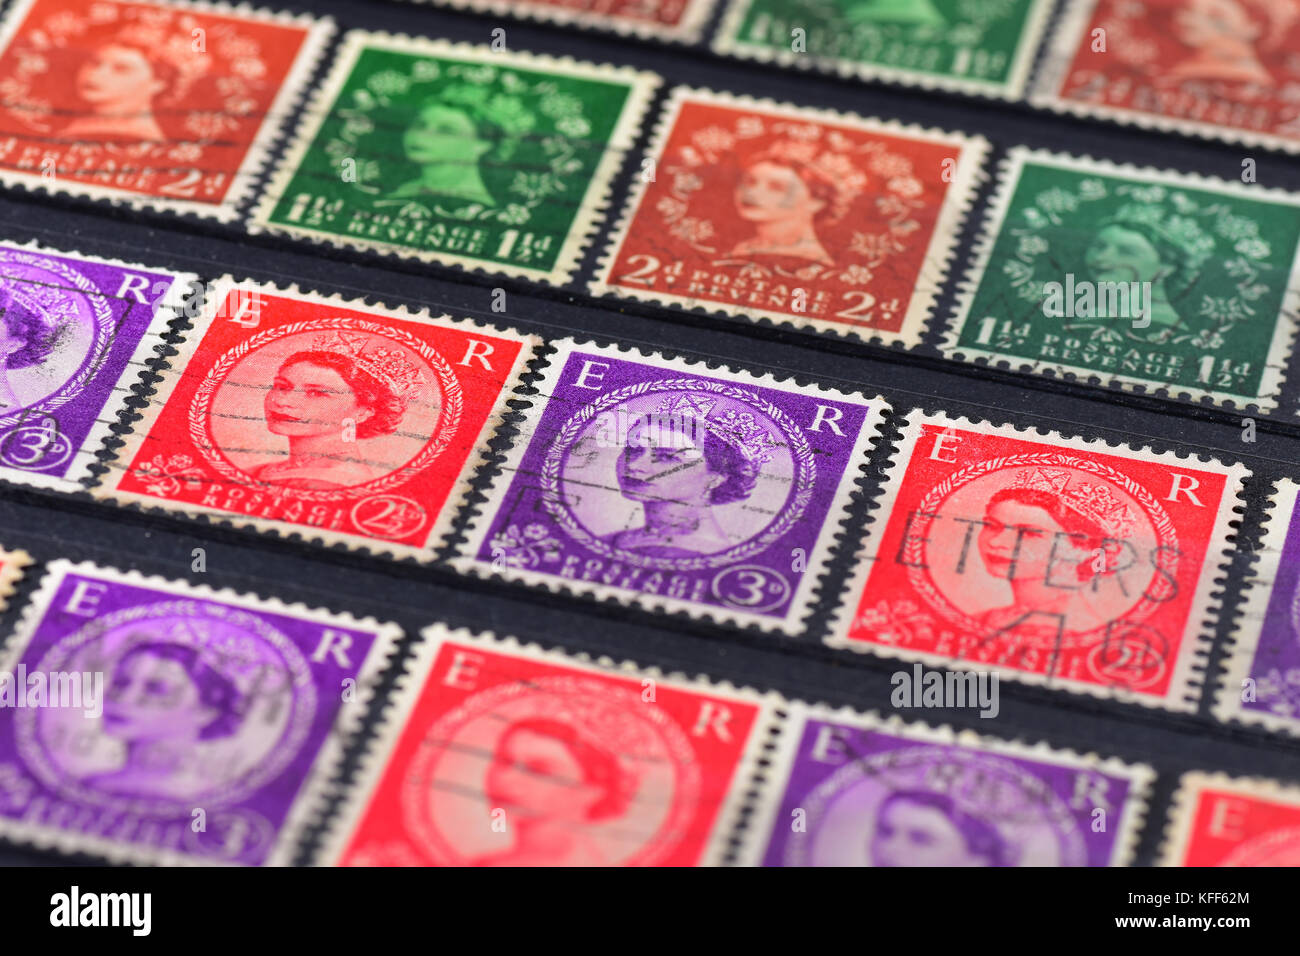 Collection of Old Postage Stamps from around The World Stock Photo - Alamy